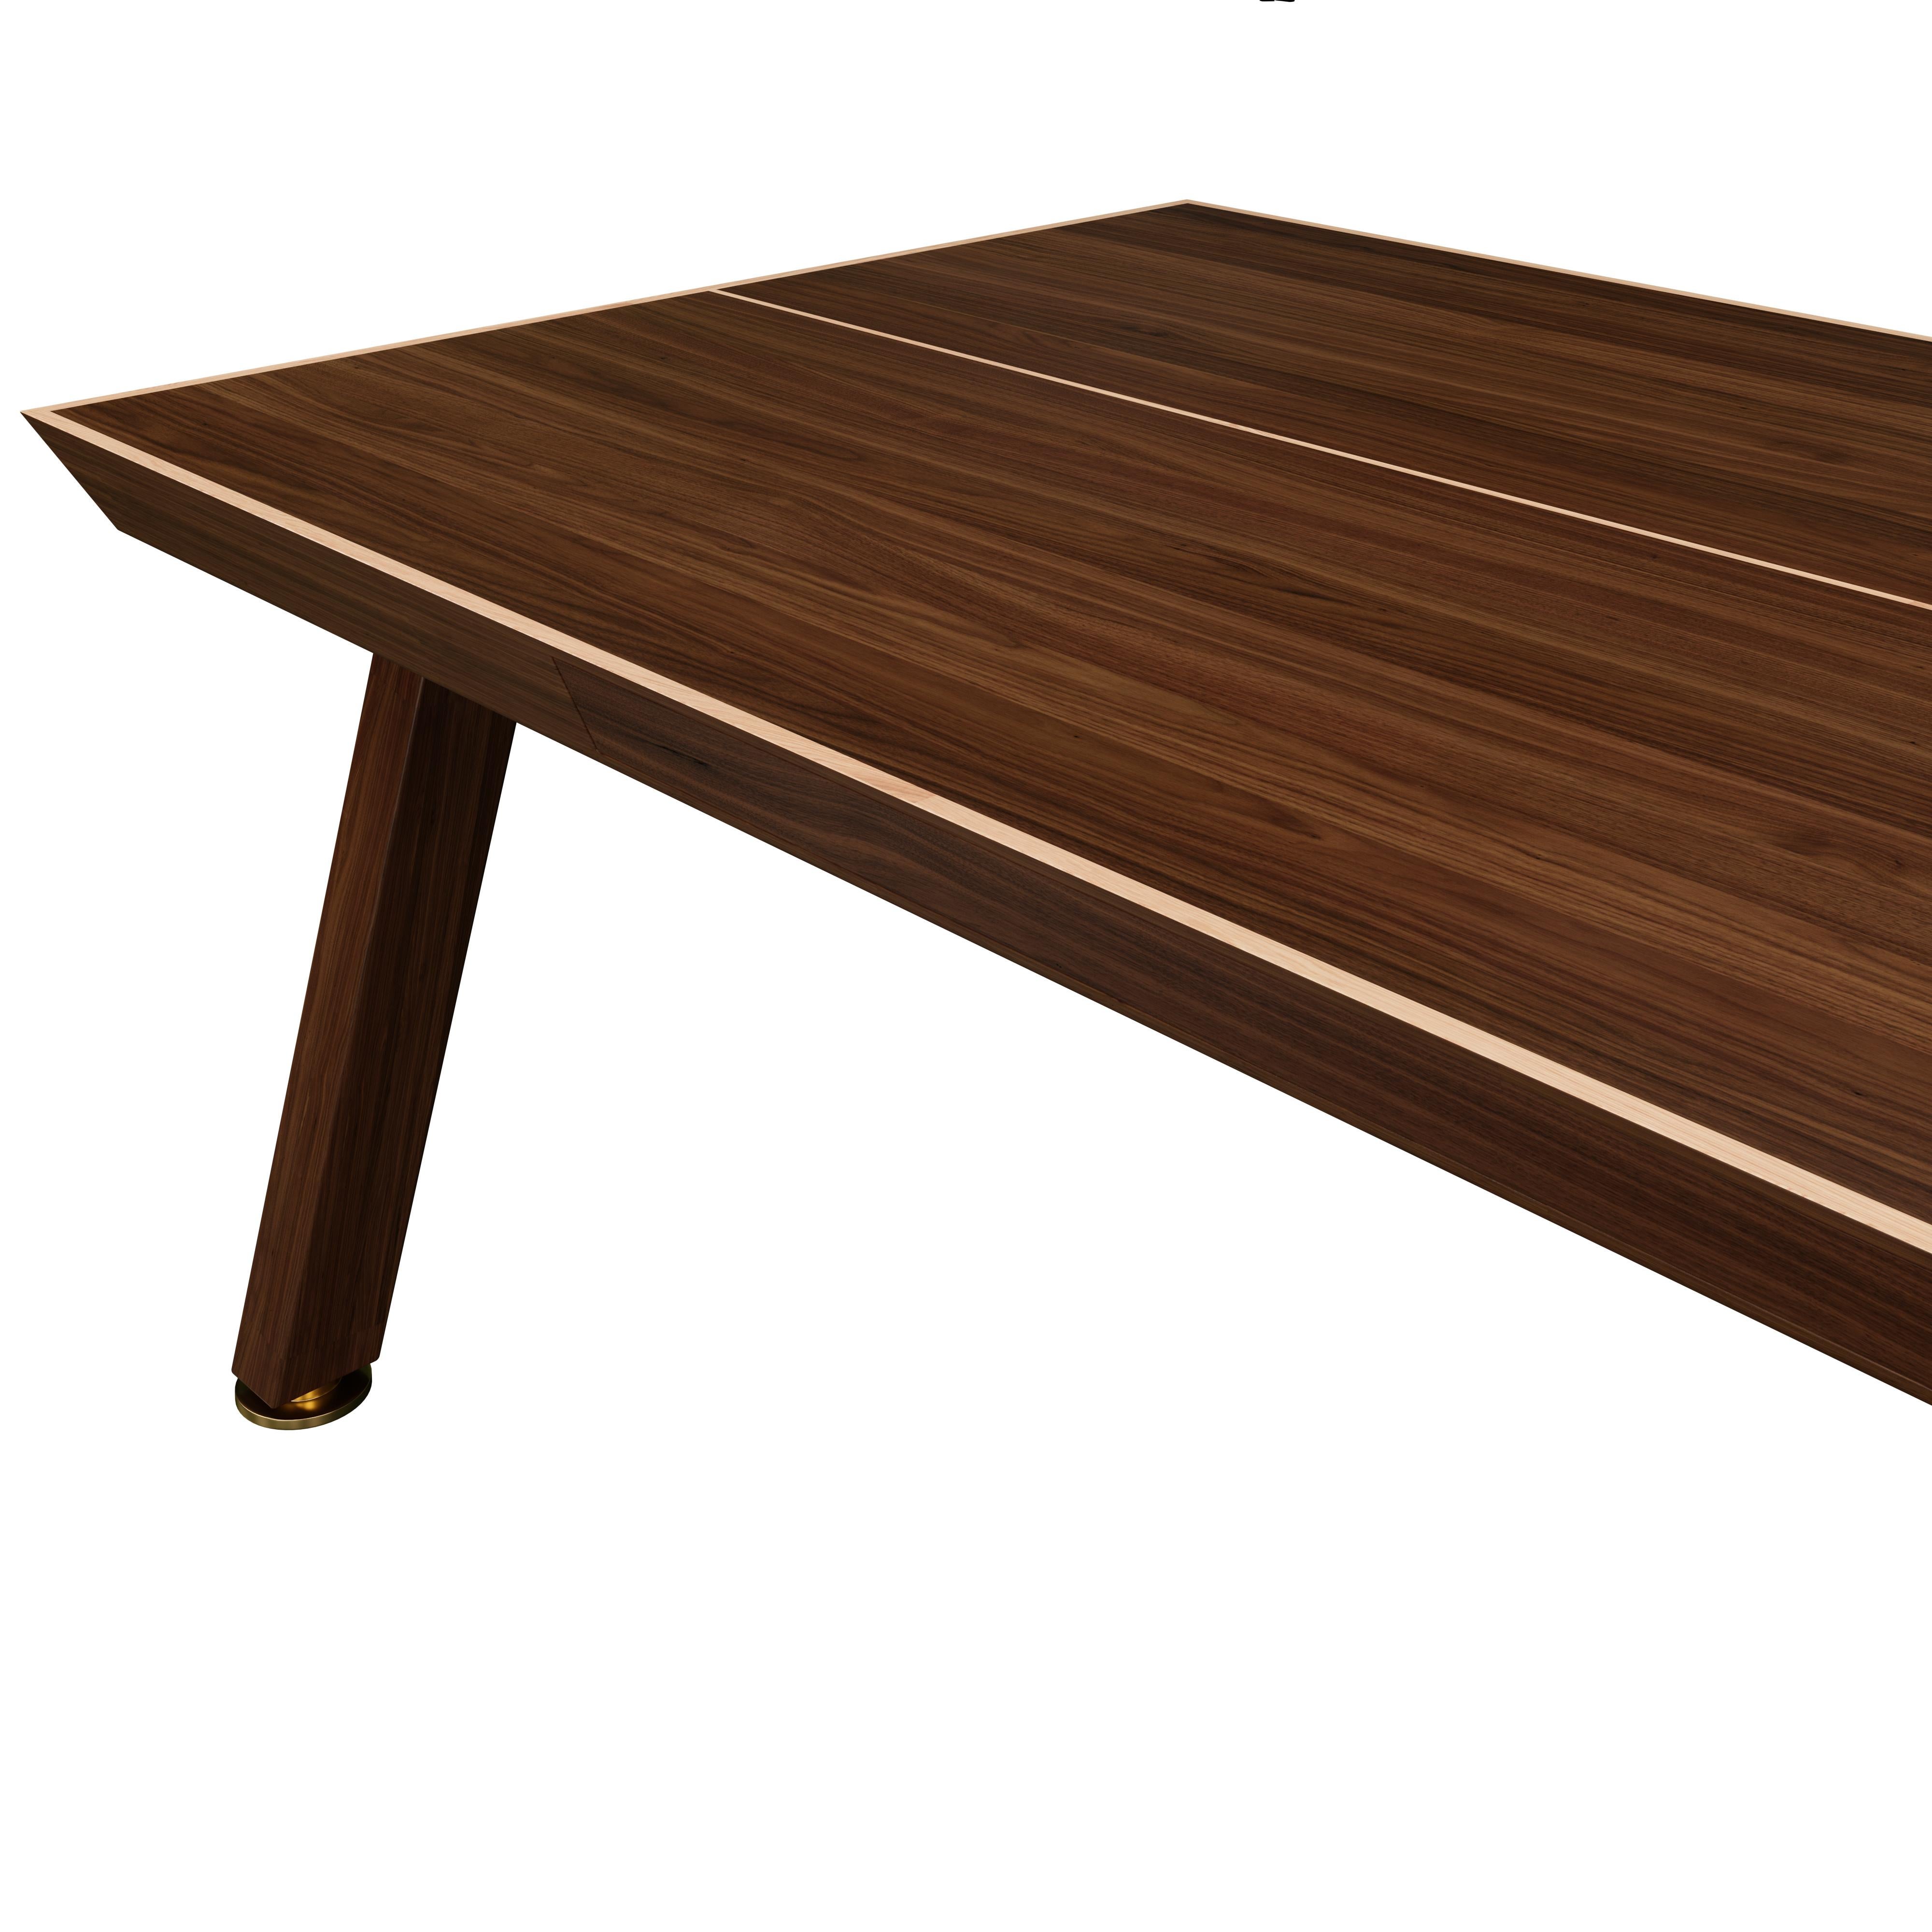 Contemporary 21st Century Keppel Ping Pong Table Walnut Wood Leather Oak For Sale